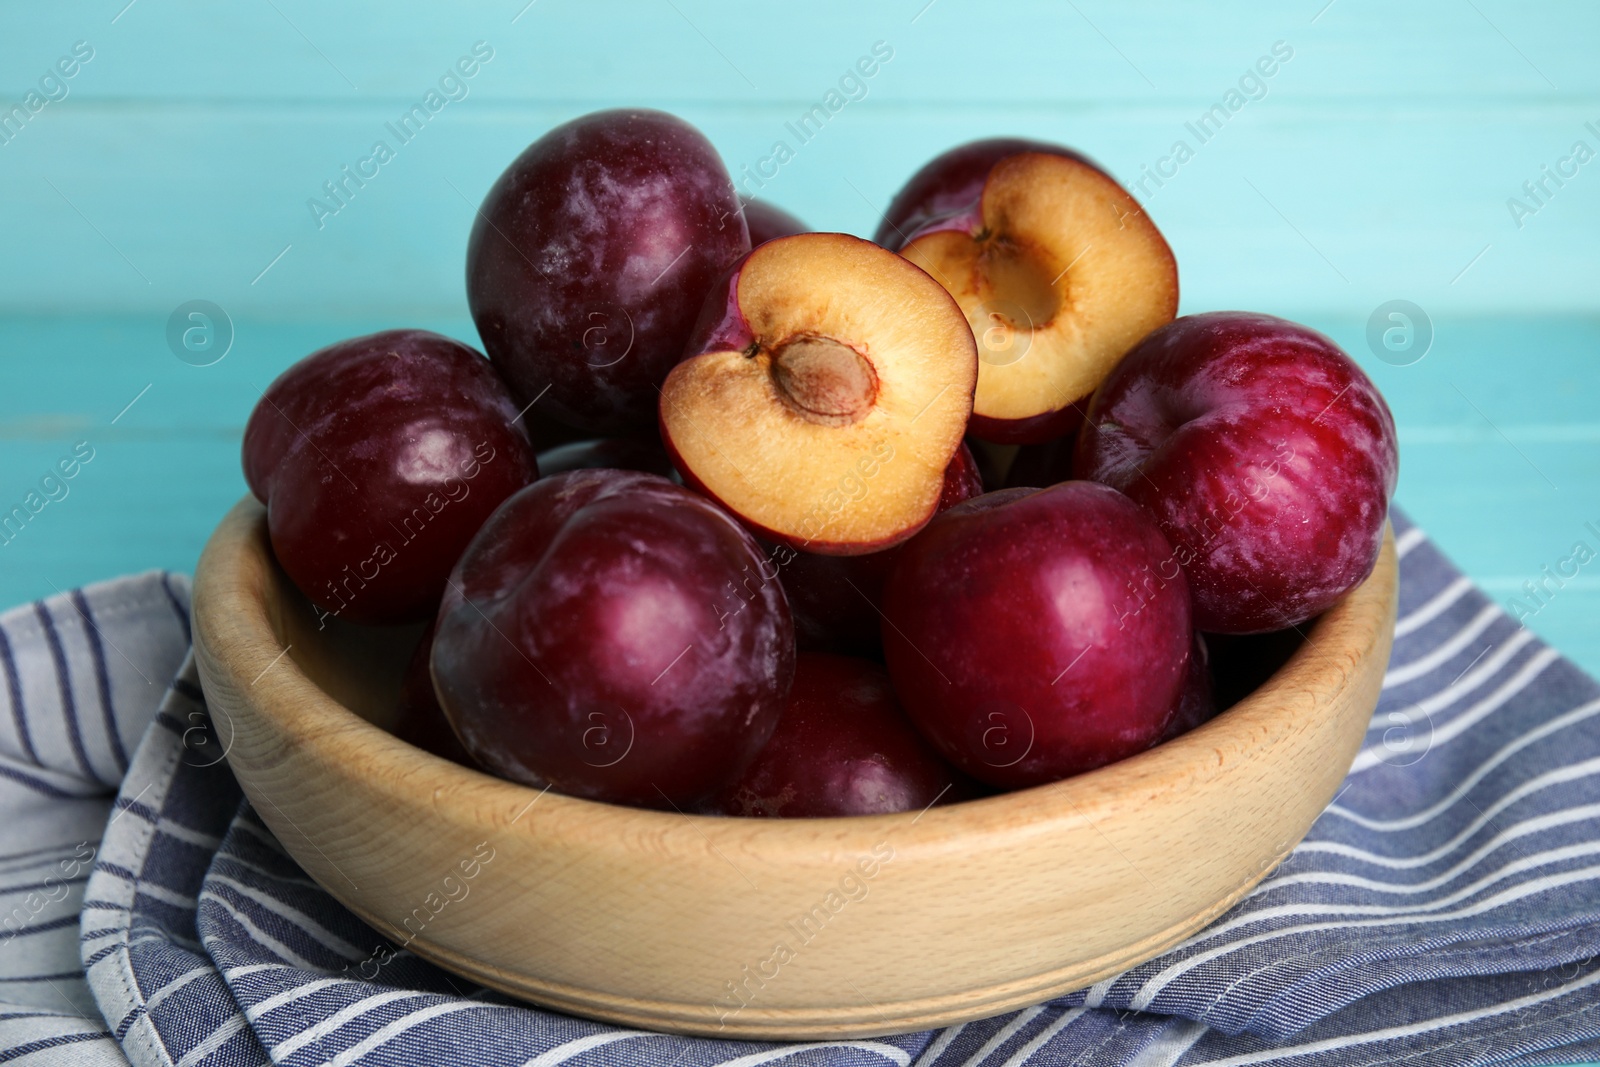 Photo of Delicious ripe plums in bowl on light blue background